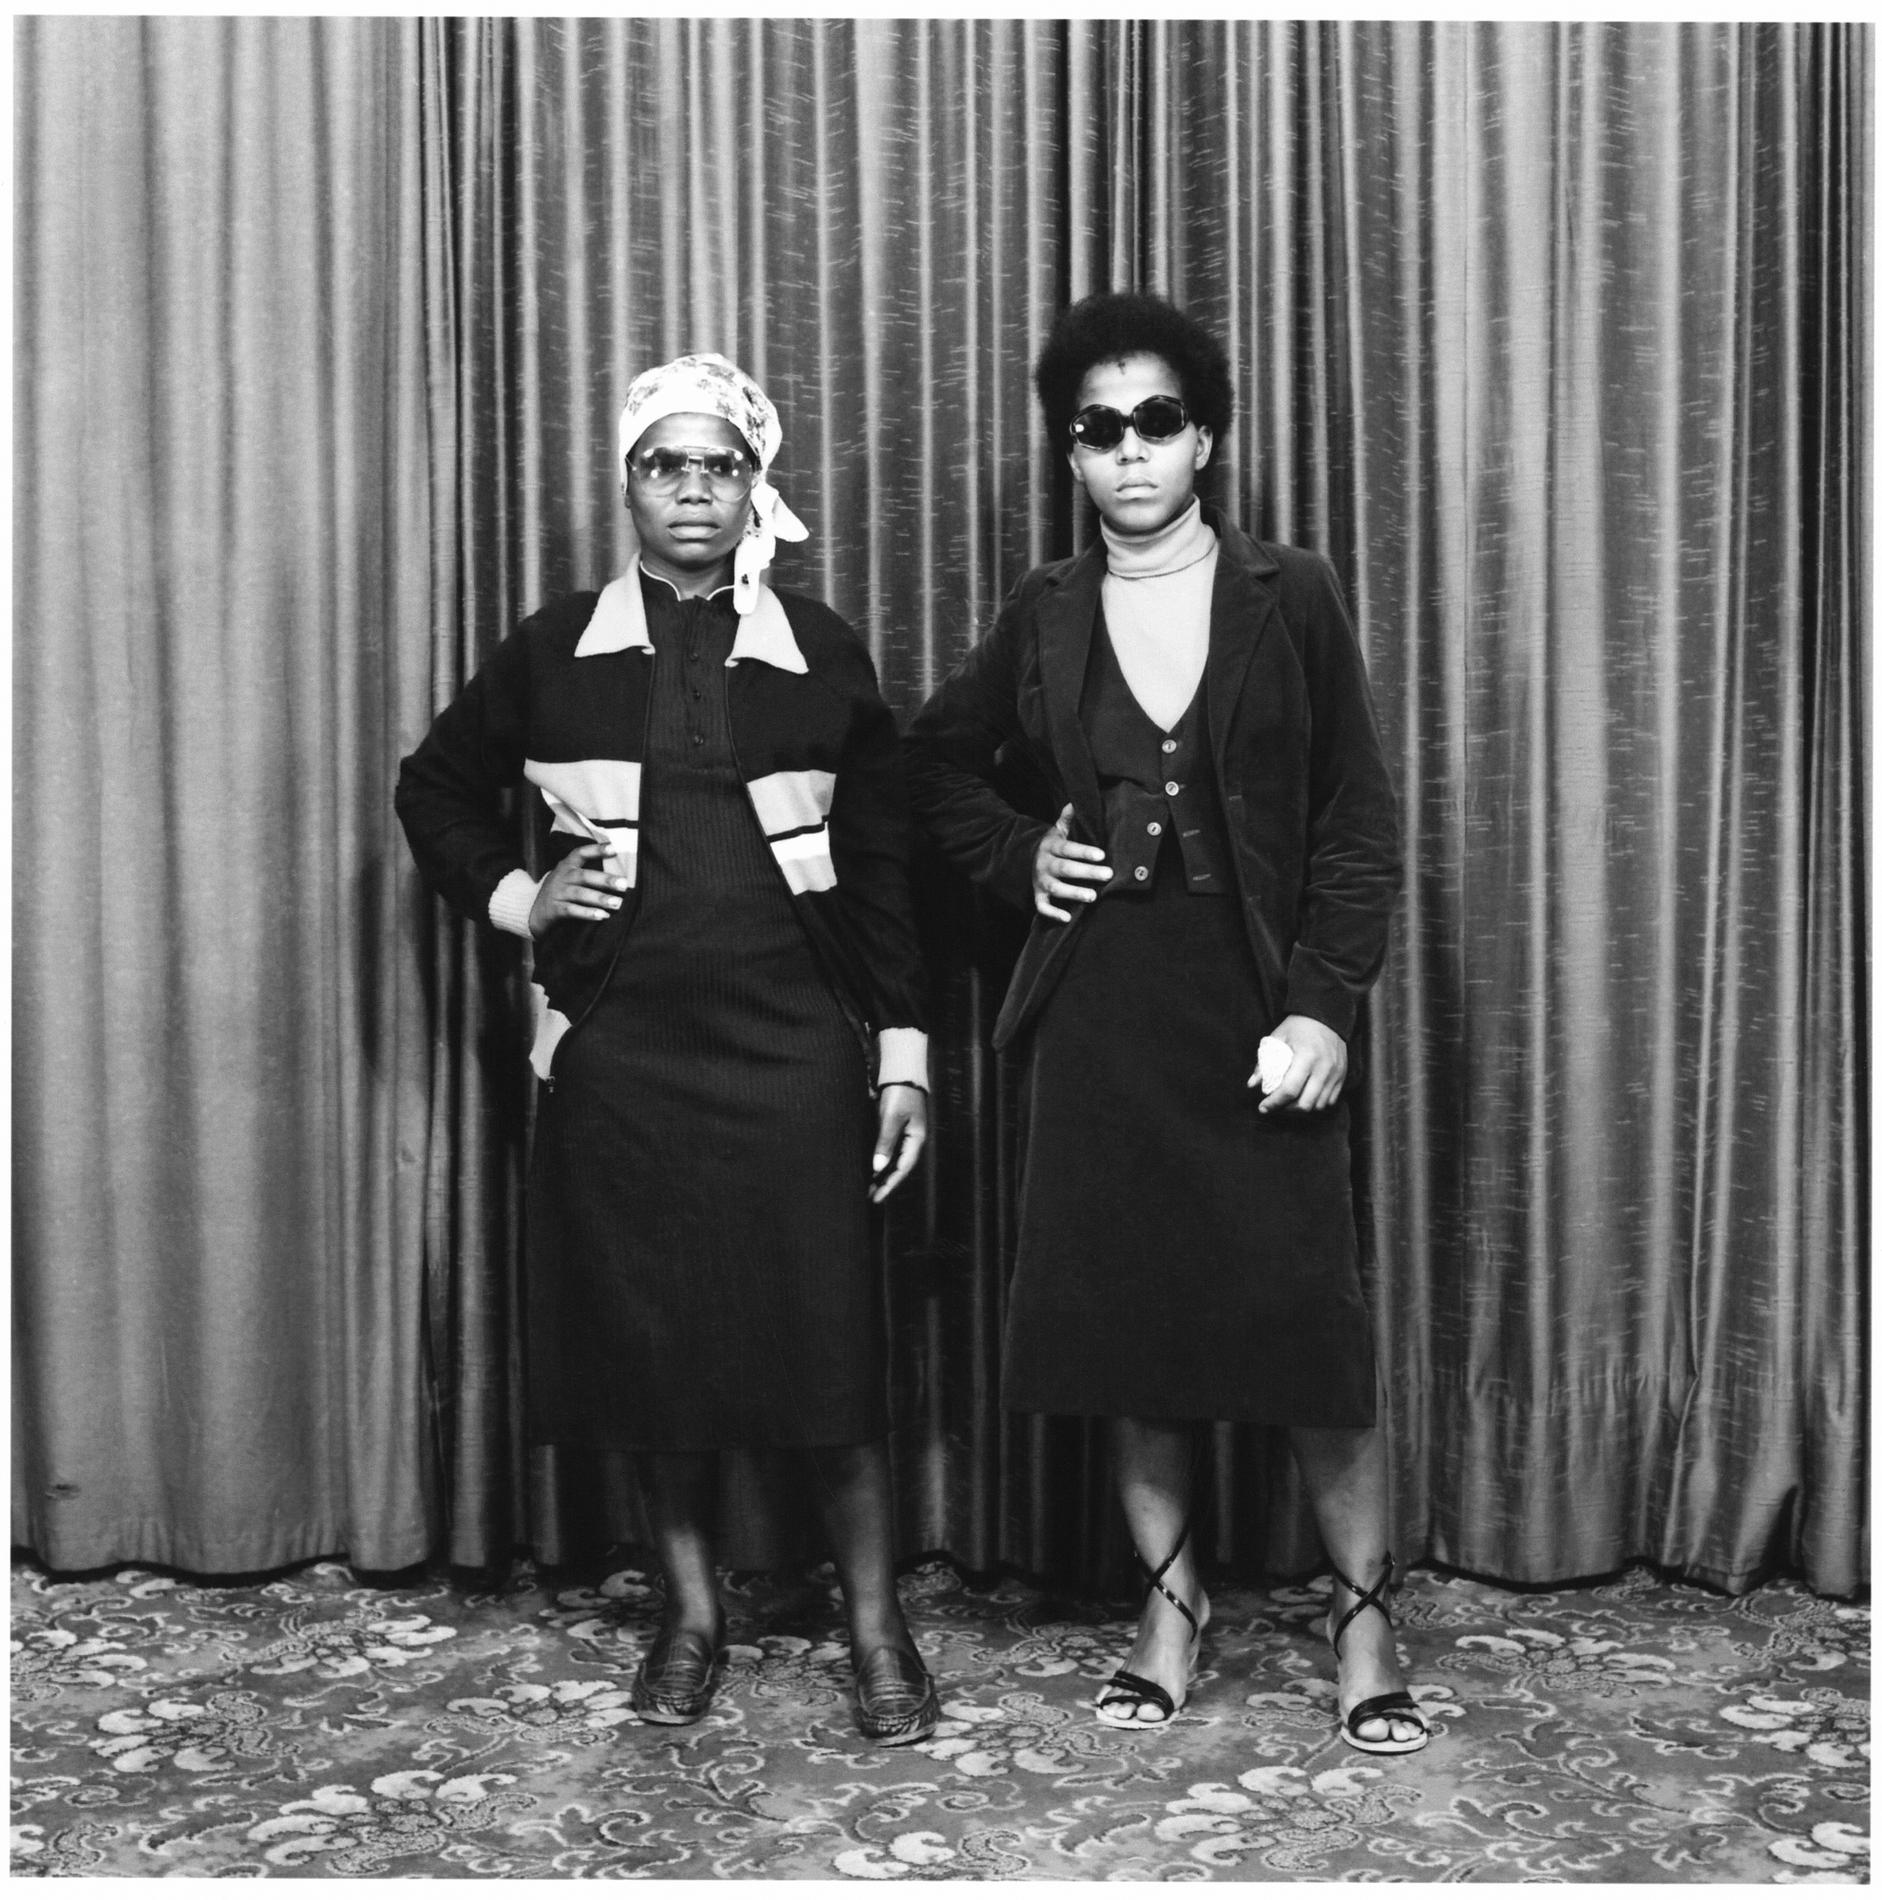 In this black and white image, two women stand confidently with their hands on their hips in front of a curtained backdrop wearing sunglasses